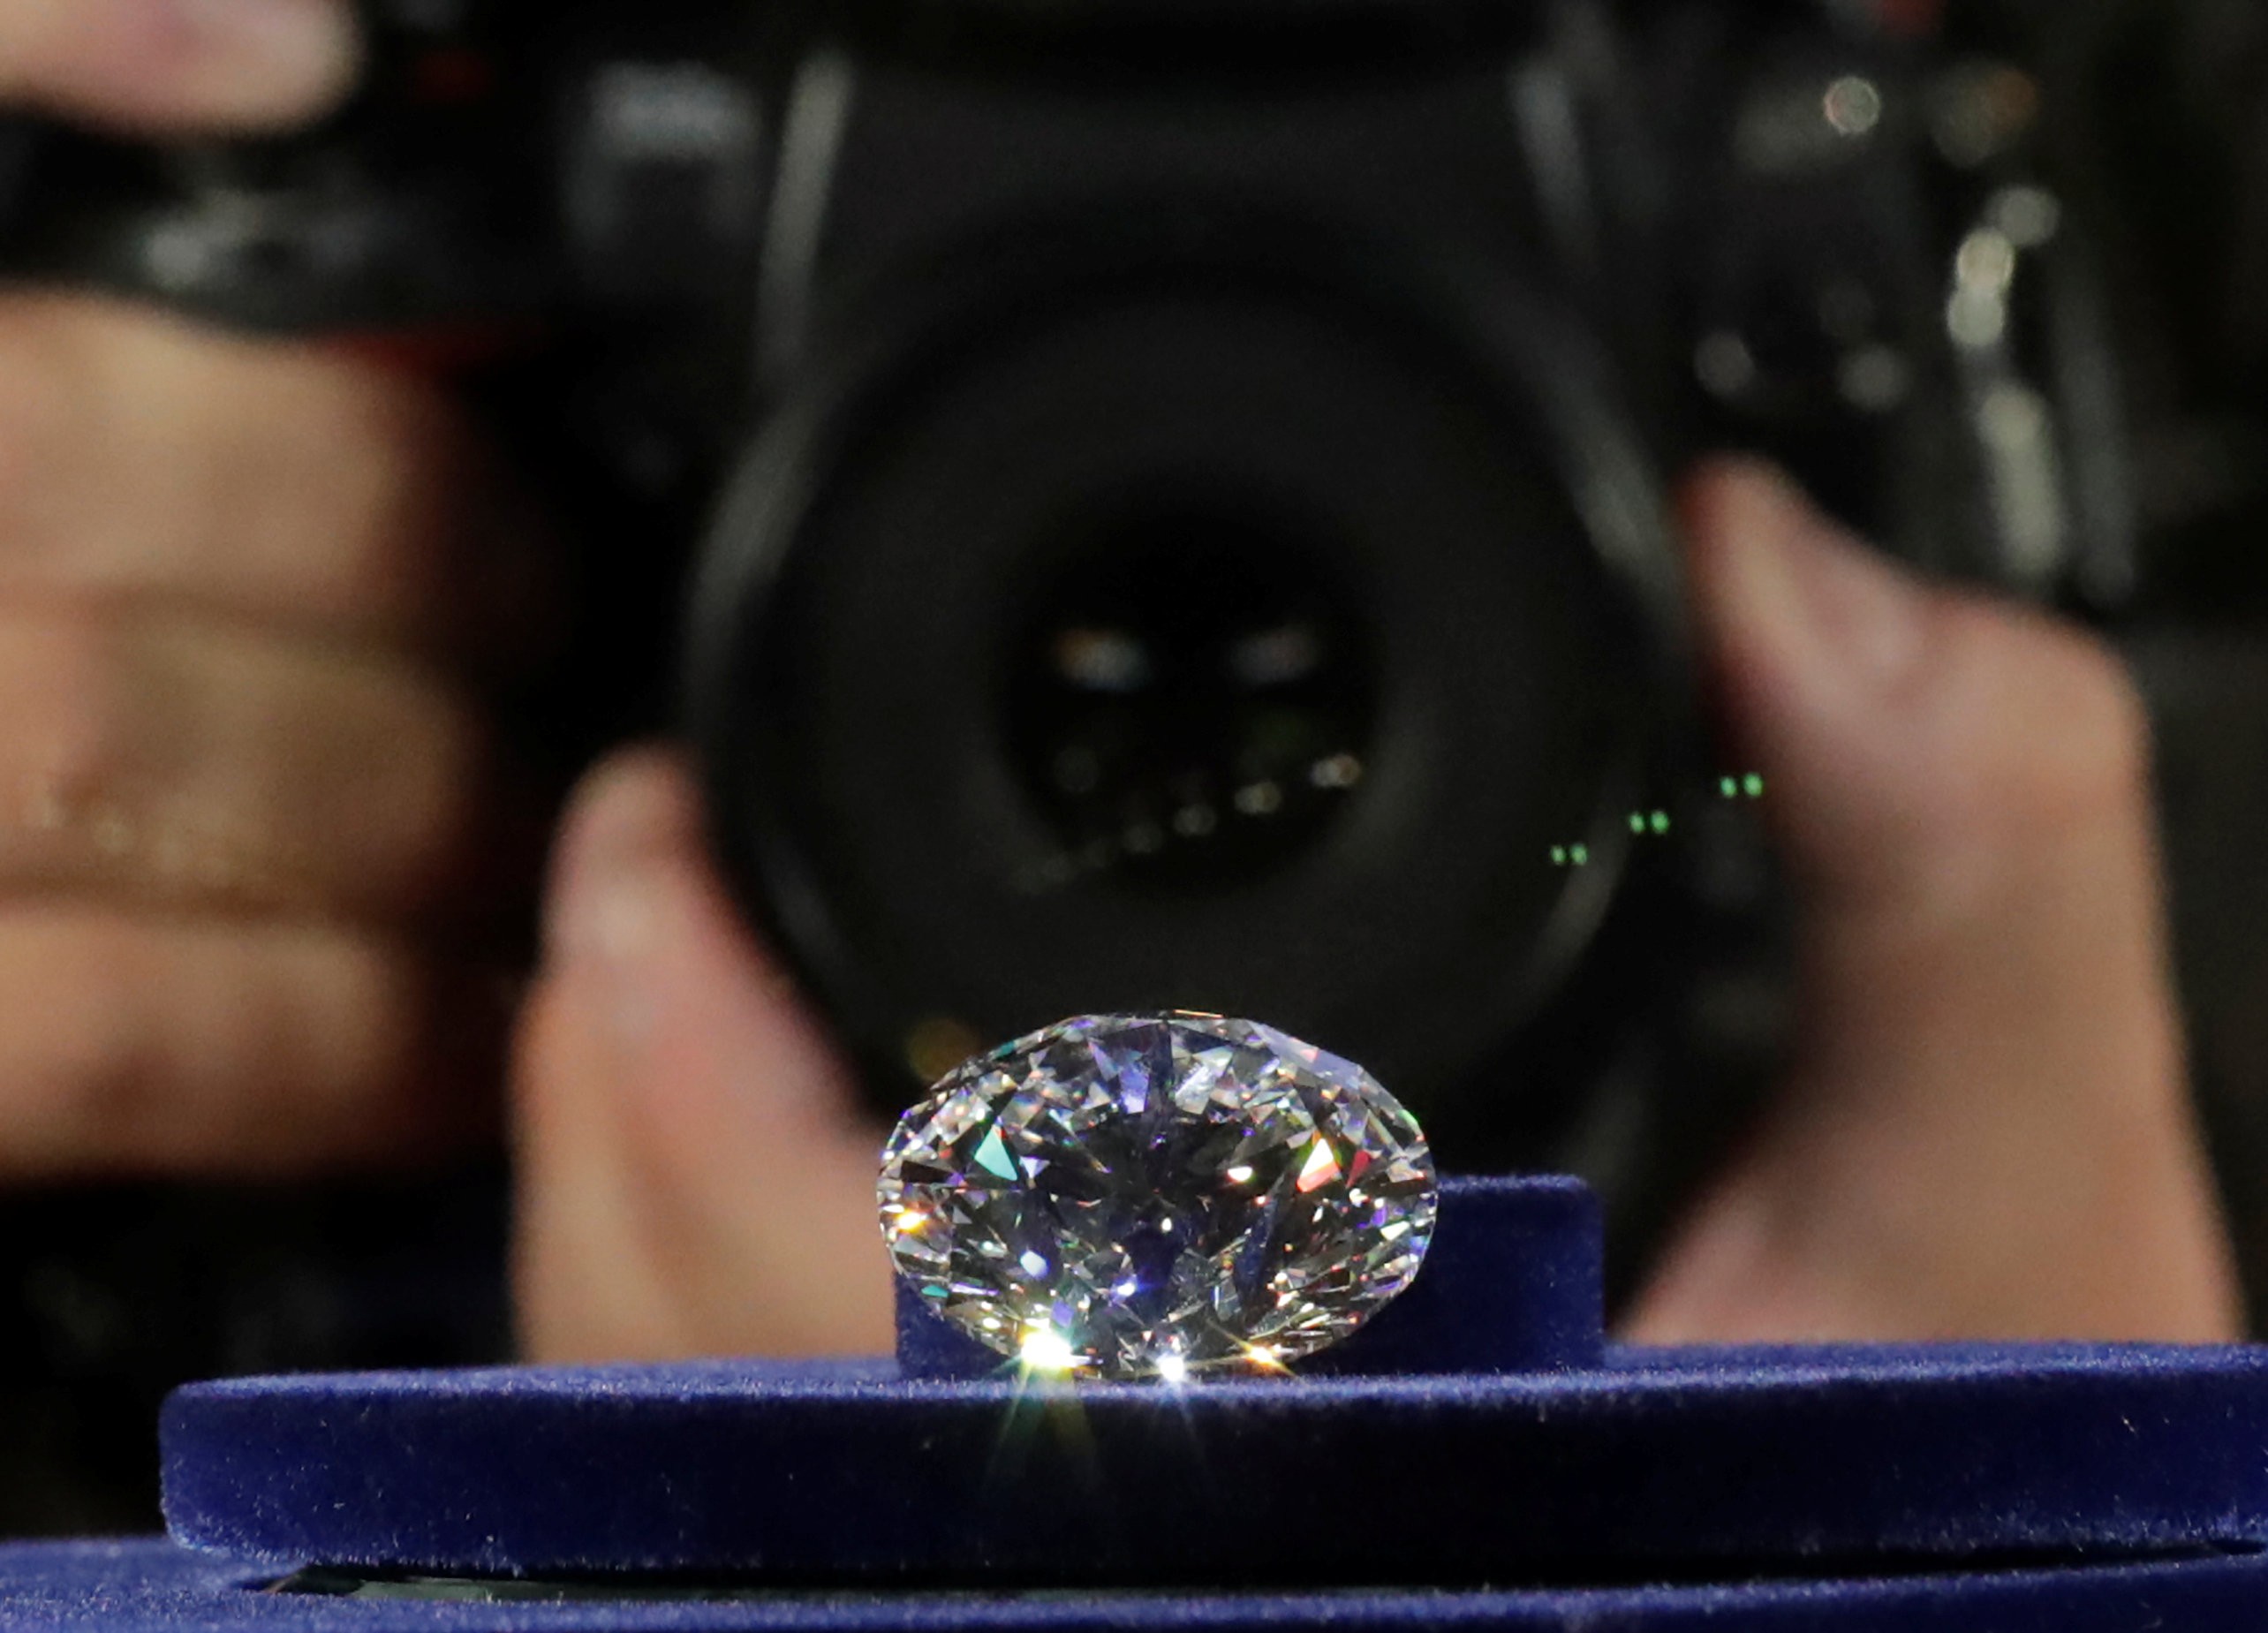 Russia’s Alrosa, the world’s largest diamond miner, plans to hold seven auctions in Hong Kong this year and work with the city’s jewellers to sell to Chinese consumers, who are more methodical than American buyers